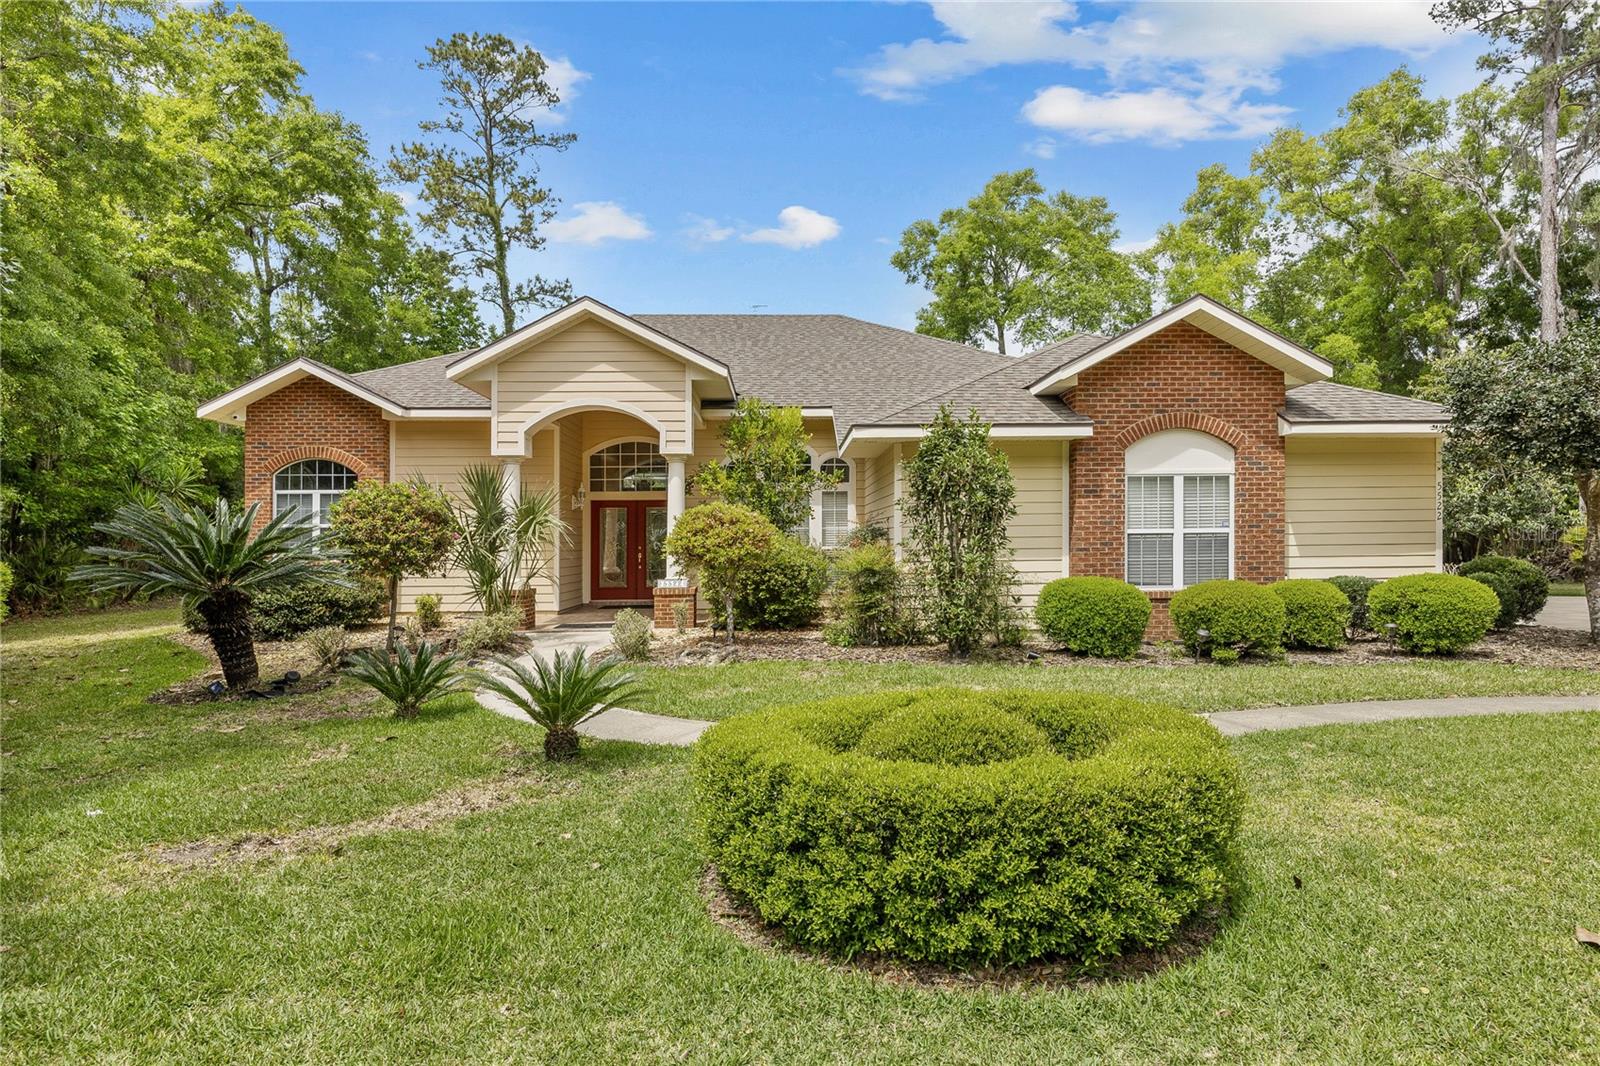 Photo of 5522 NW 51ST AVENUE, GAINESVILLE, FL 32653